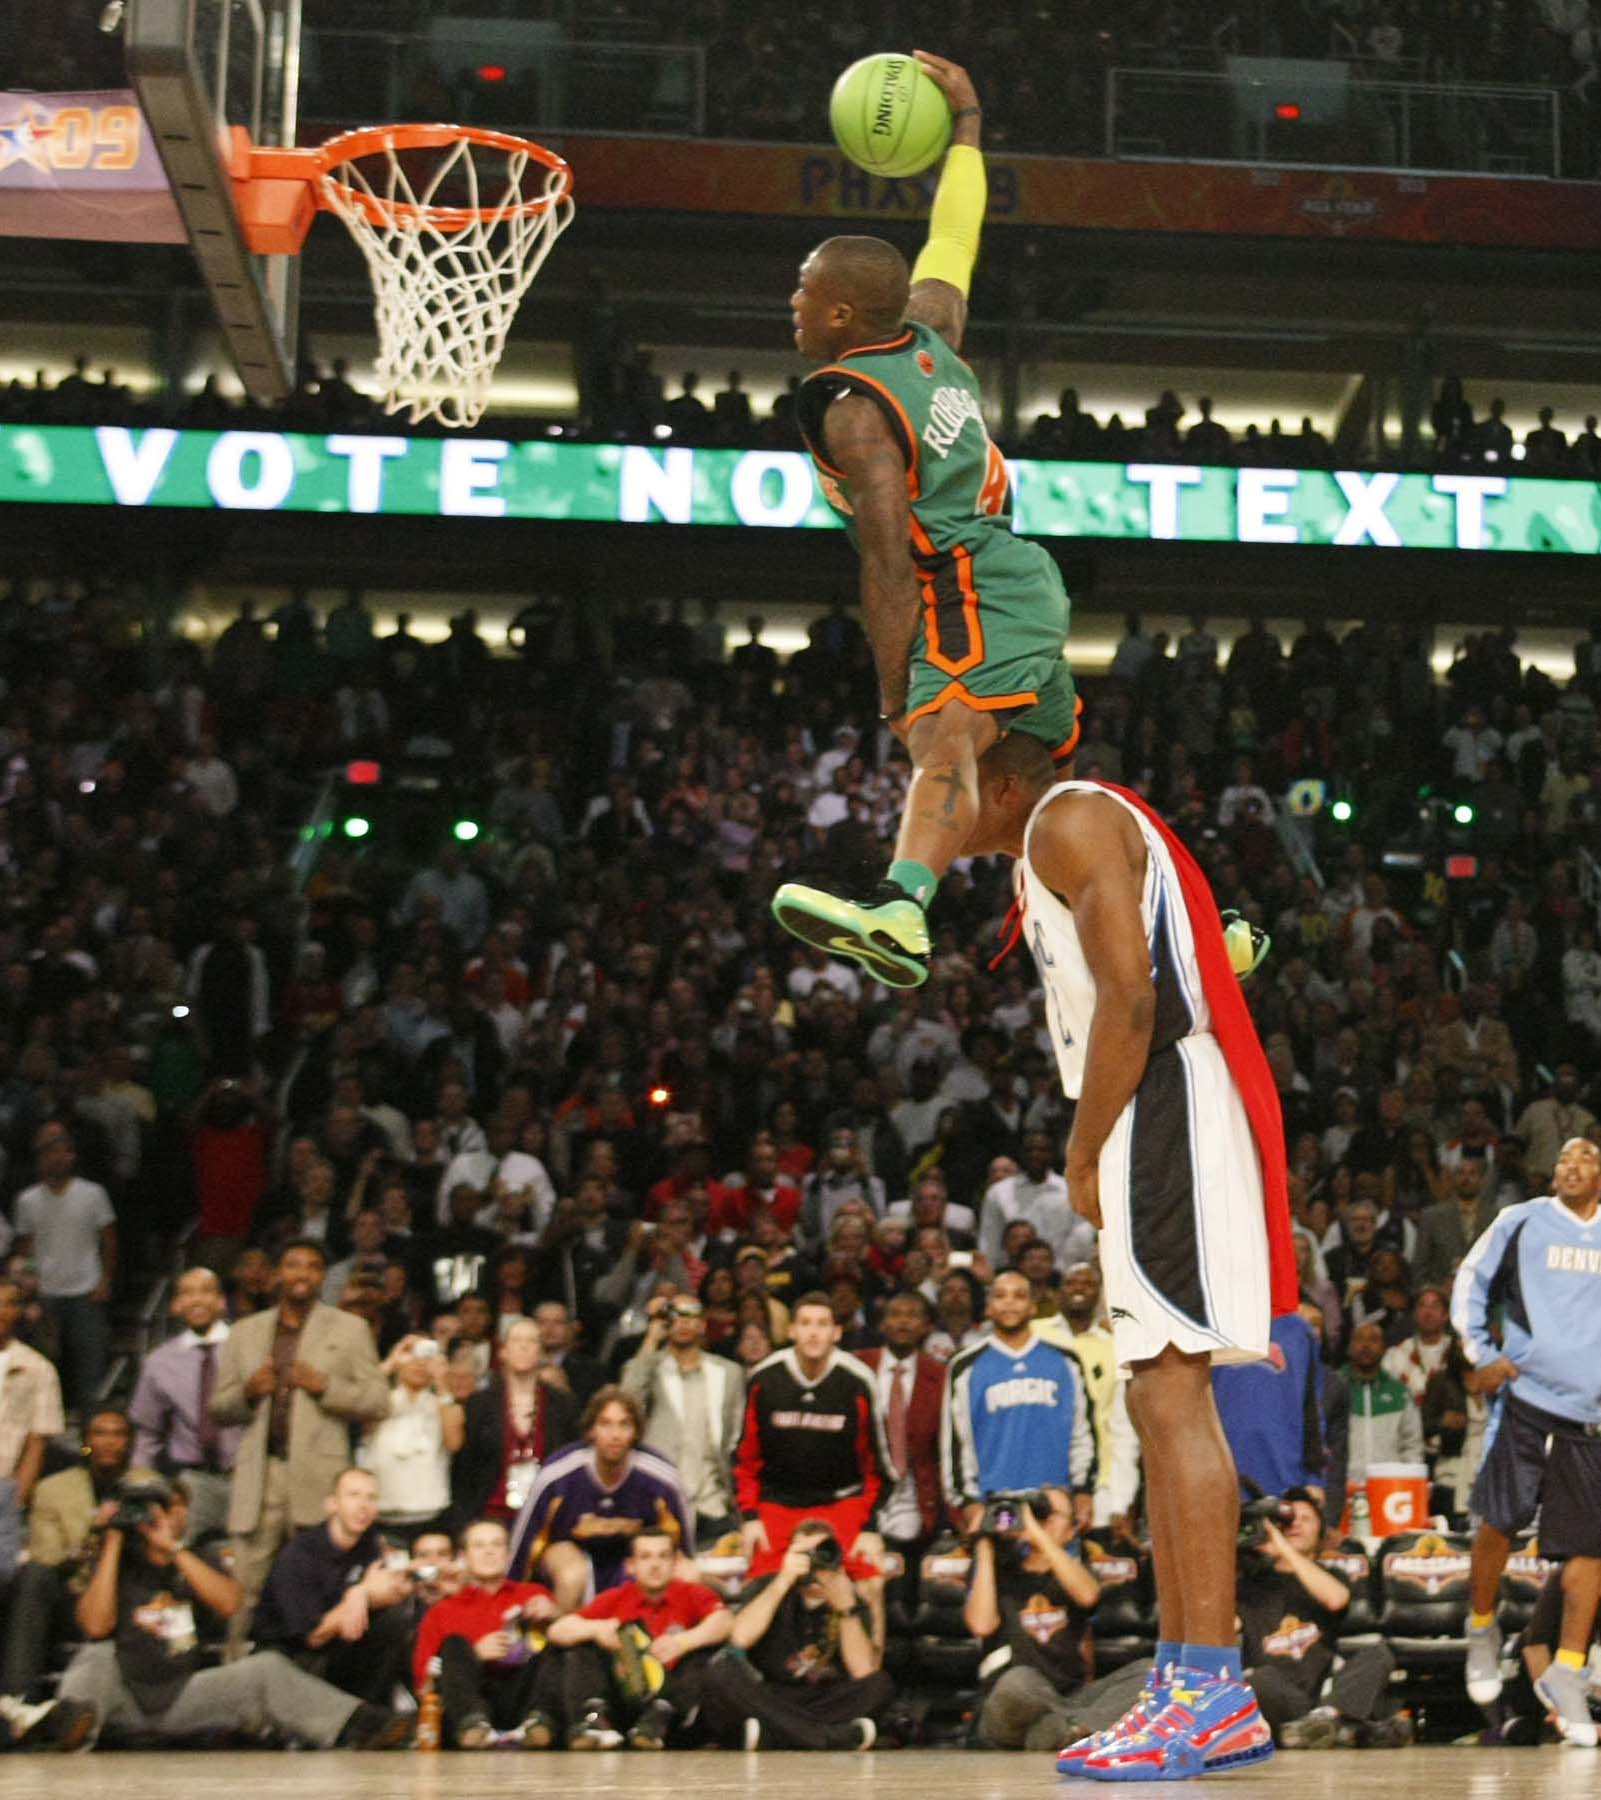 Hilarious! Nate Robinson 5'9 size 11 running suicides and trying to dunk  in Shaq 7'1 size 23 shoe 